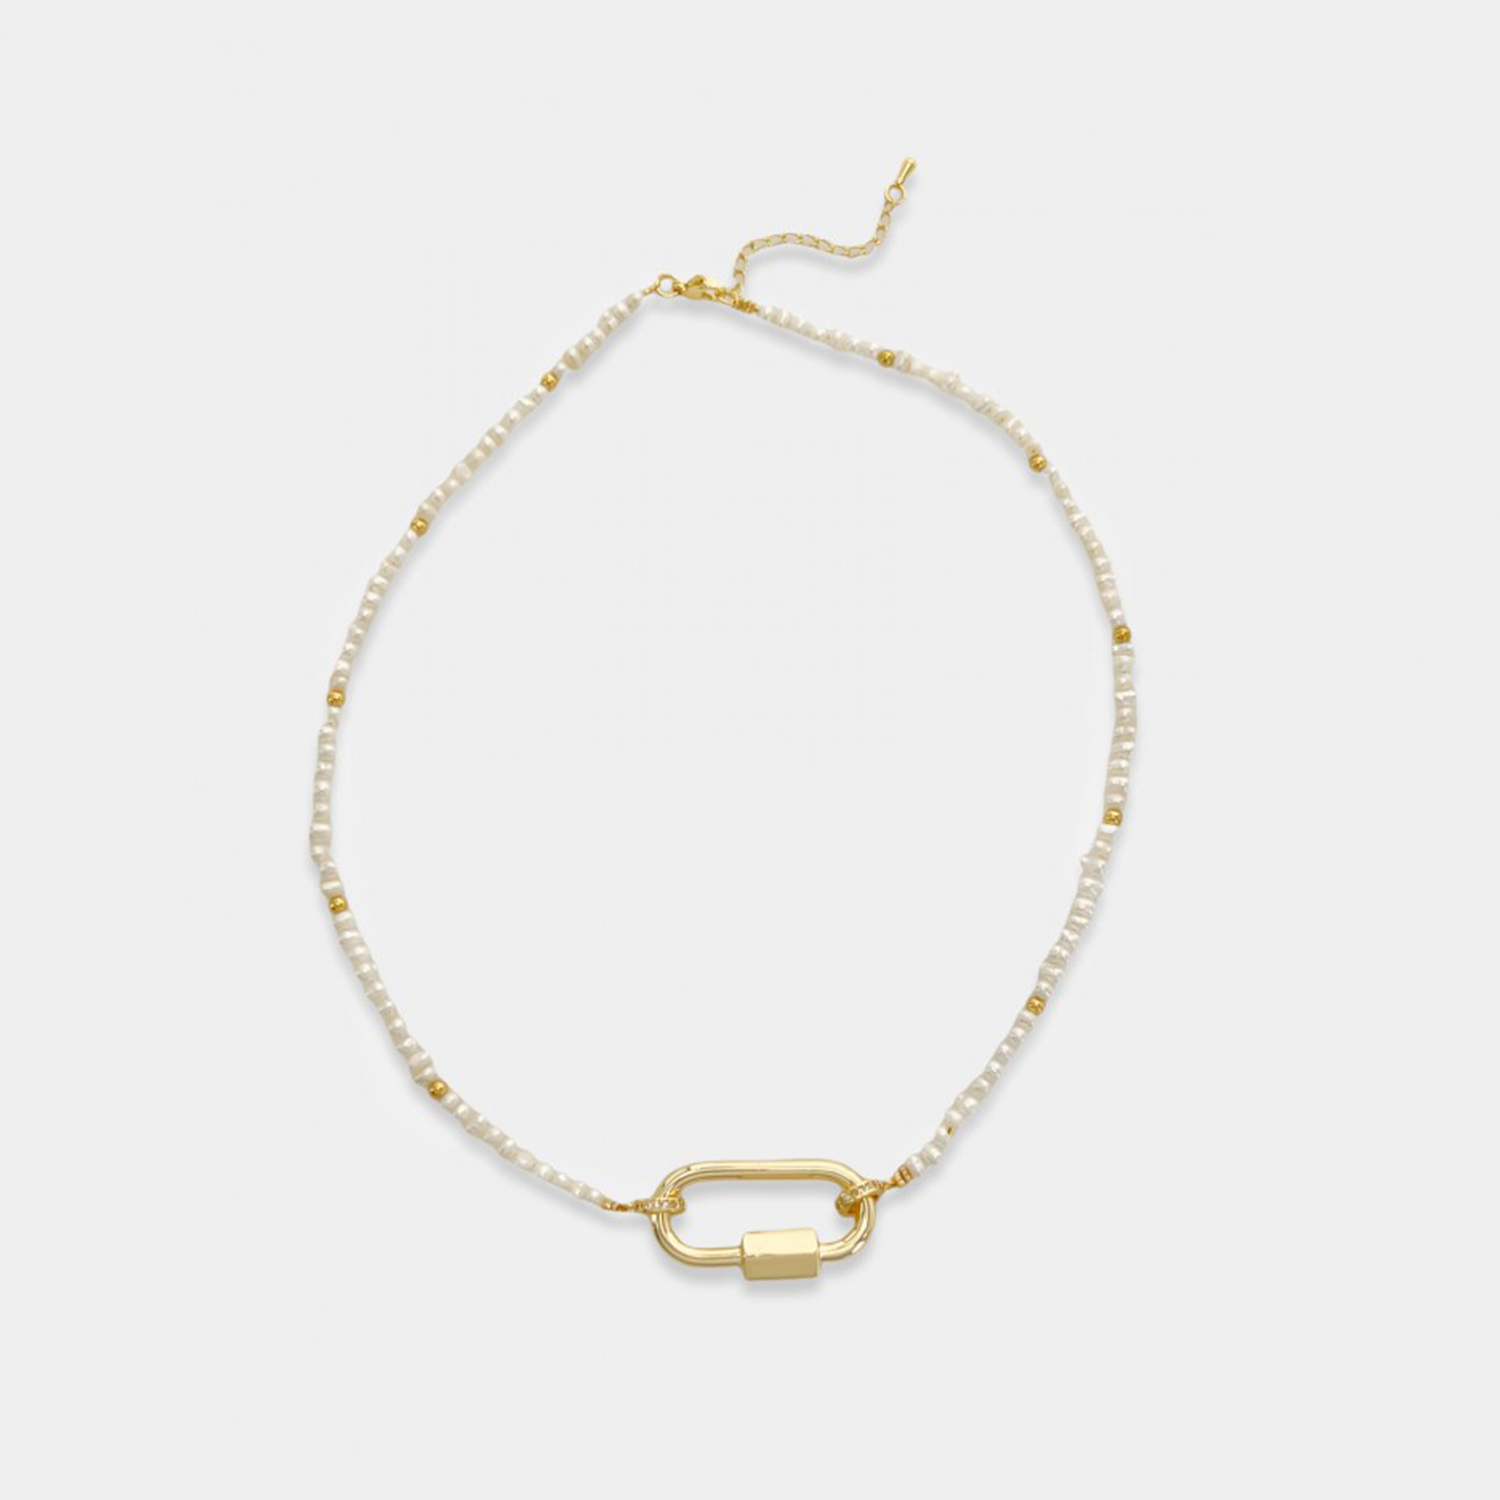 Carabiner Pearl Necklace. Freshwater pearls with 3mm stainless steel accents and a stainless steel carabiner. Open the carabiner and add your favorite charms and pendants for some extra flare